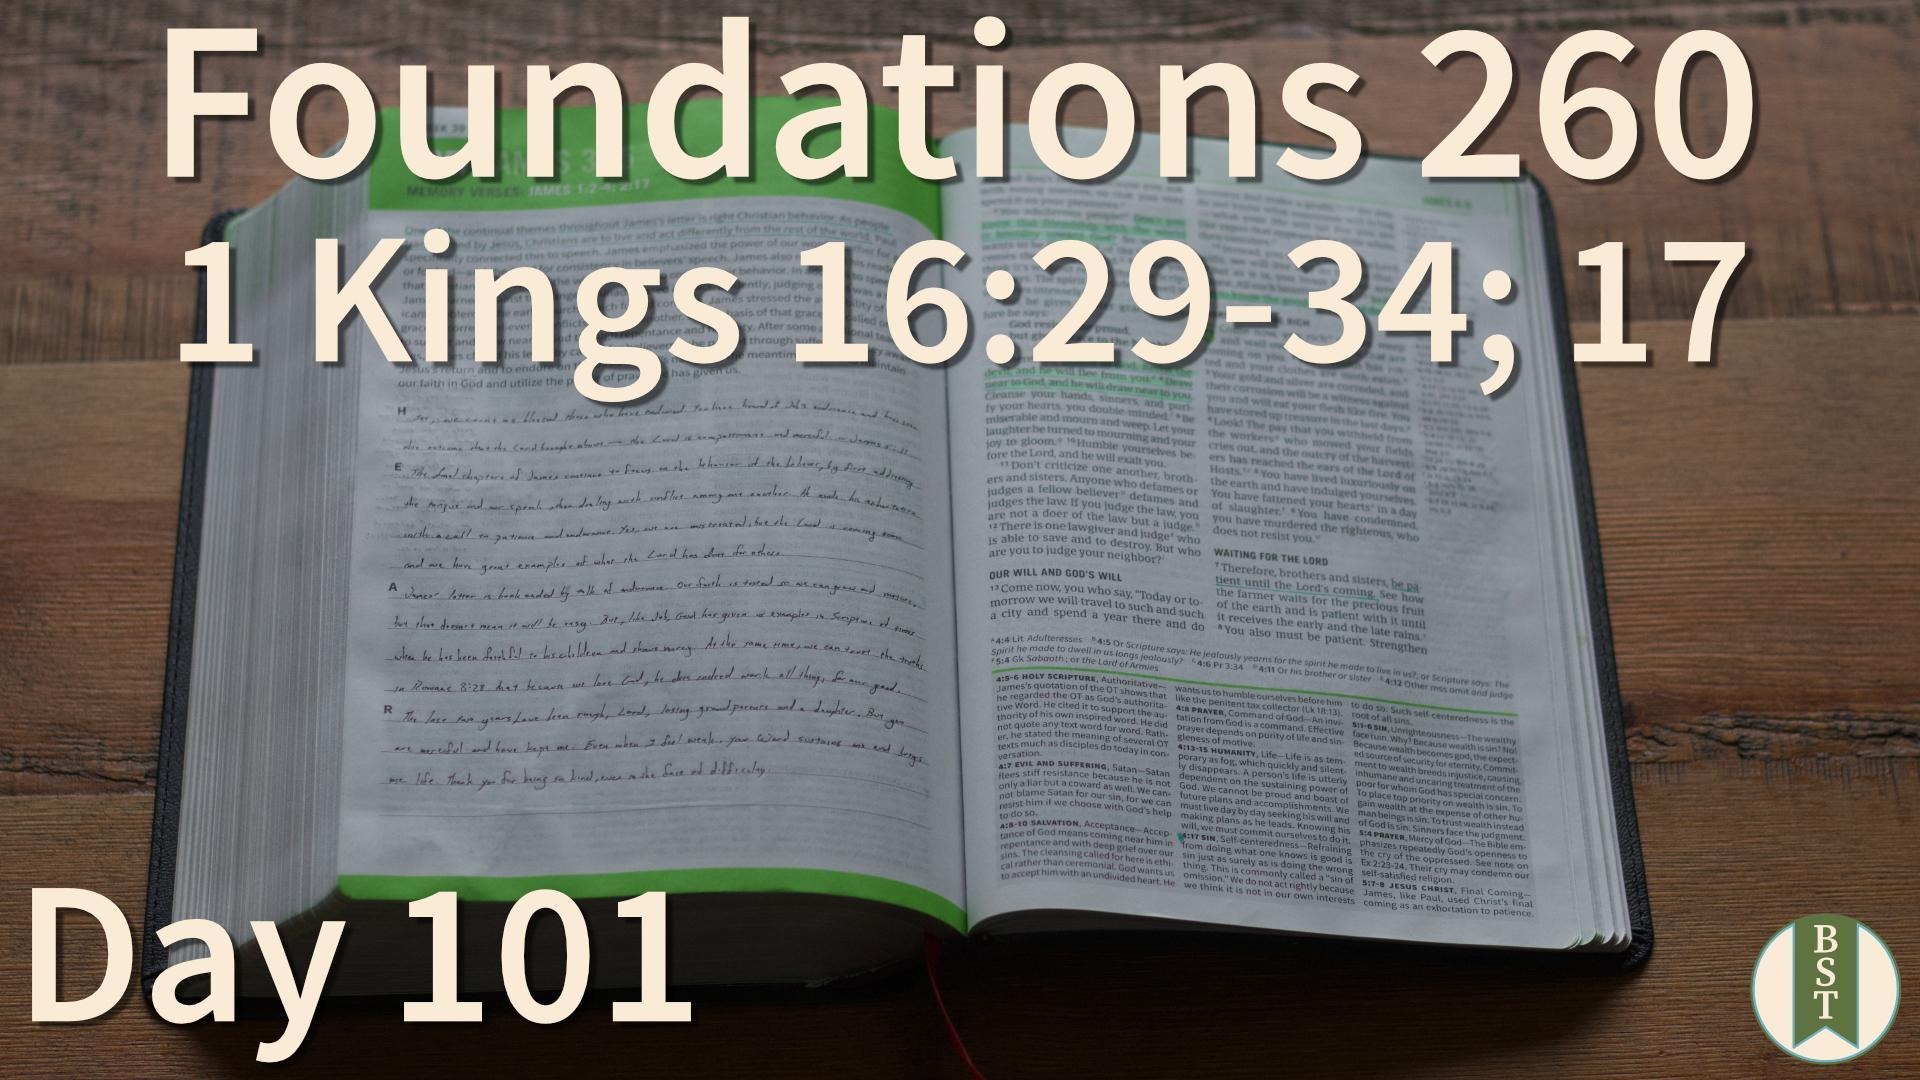 F260 Day 101: 1 Kings 16:29-34; 17